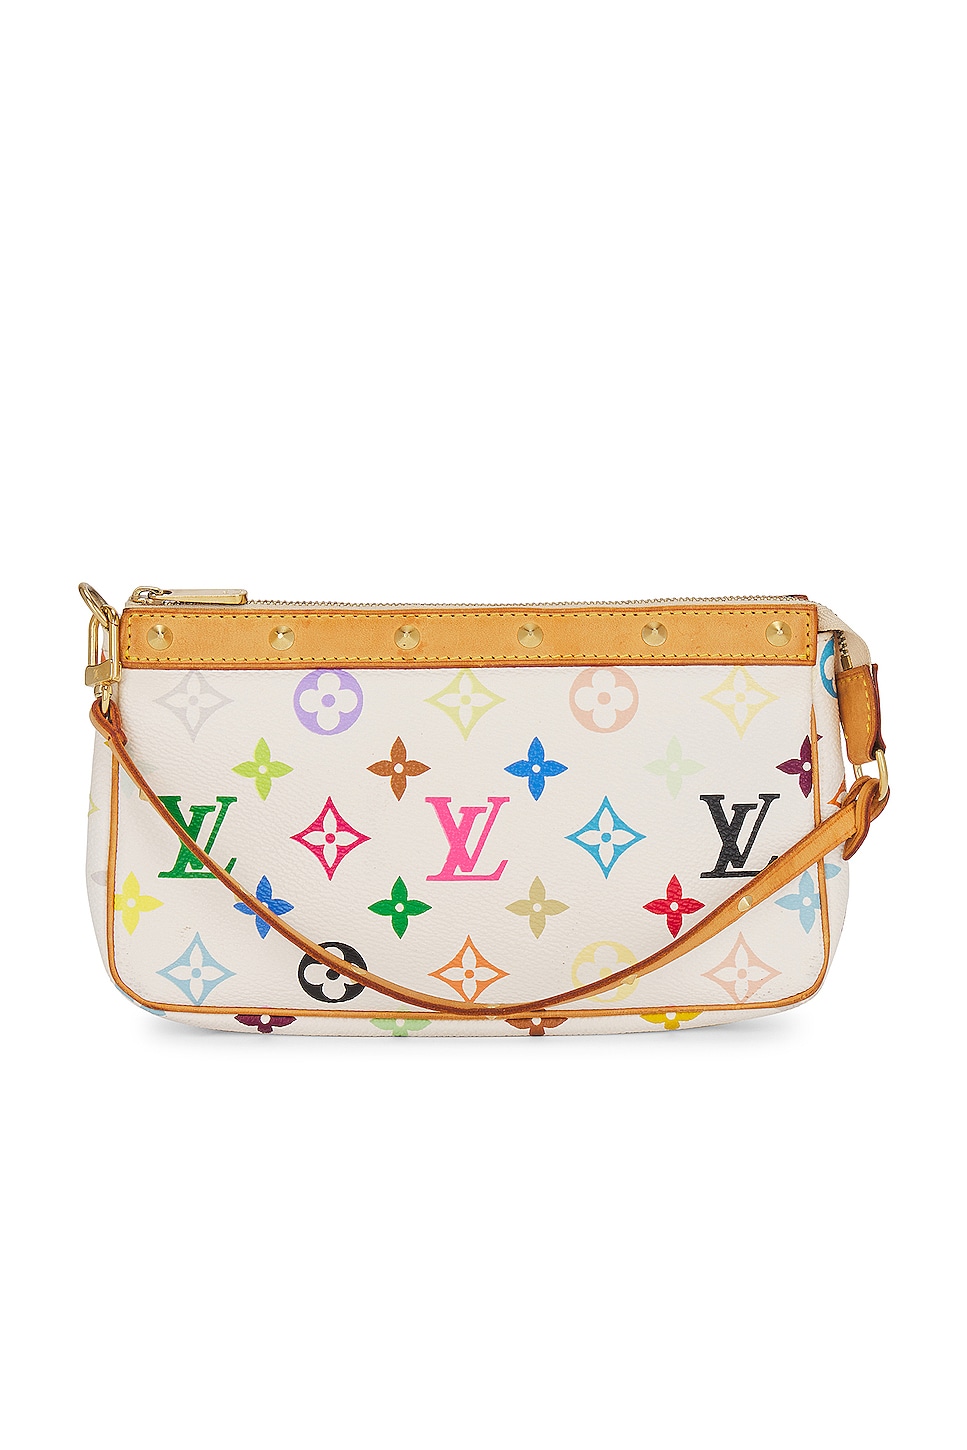 Louis Vuitton to release the Multi Pochette Accessoires in October